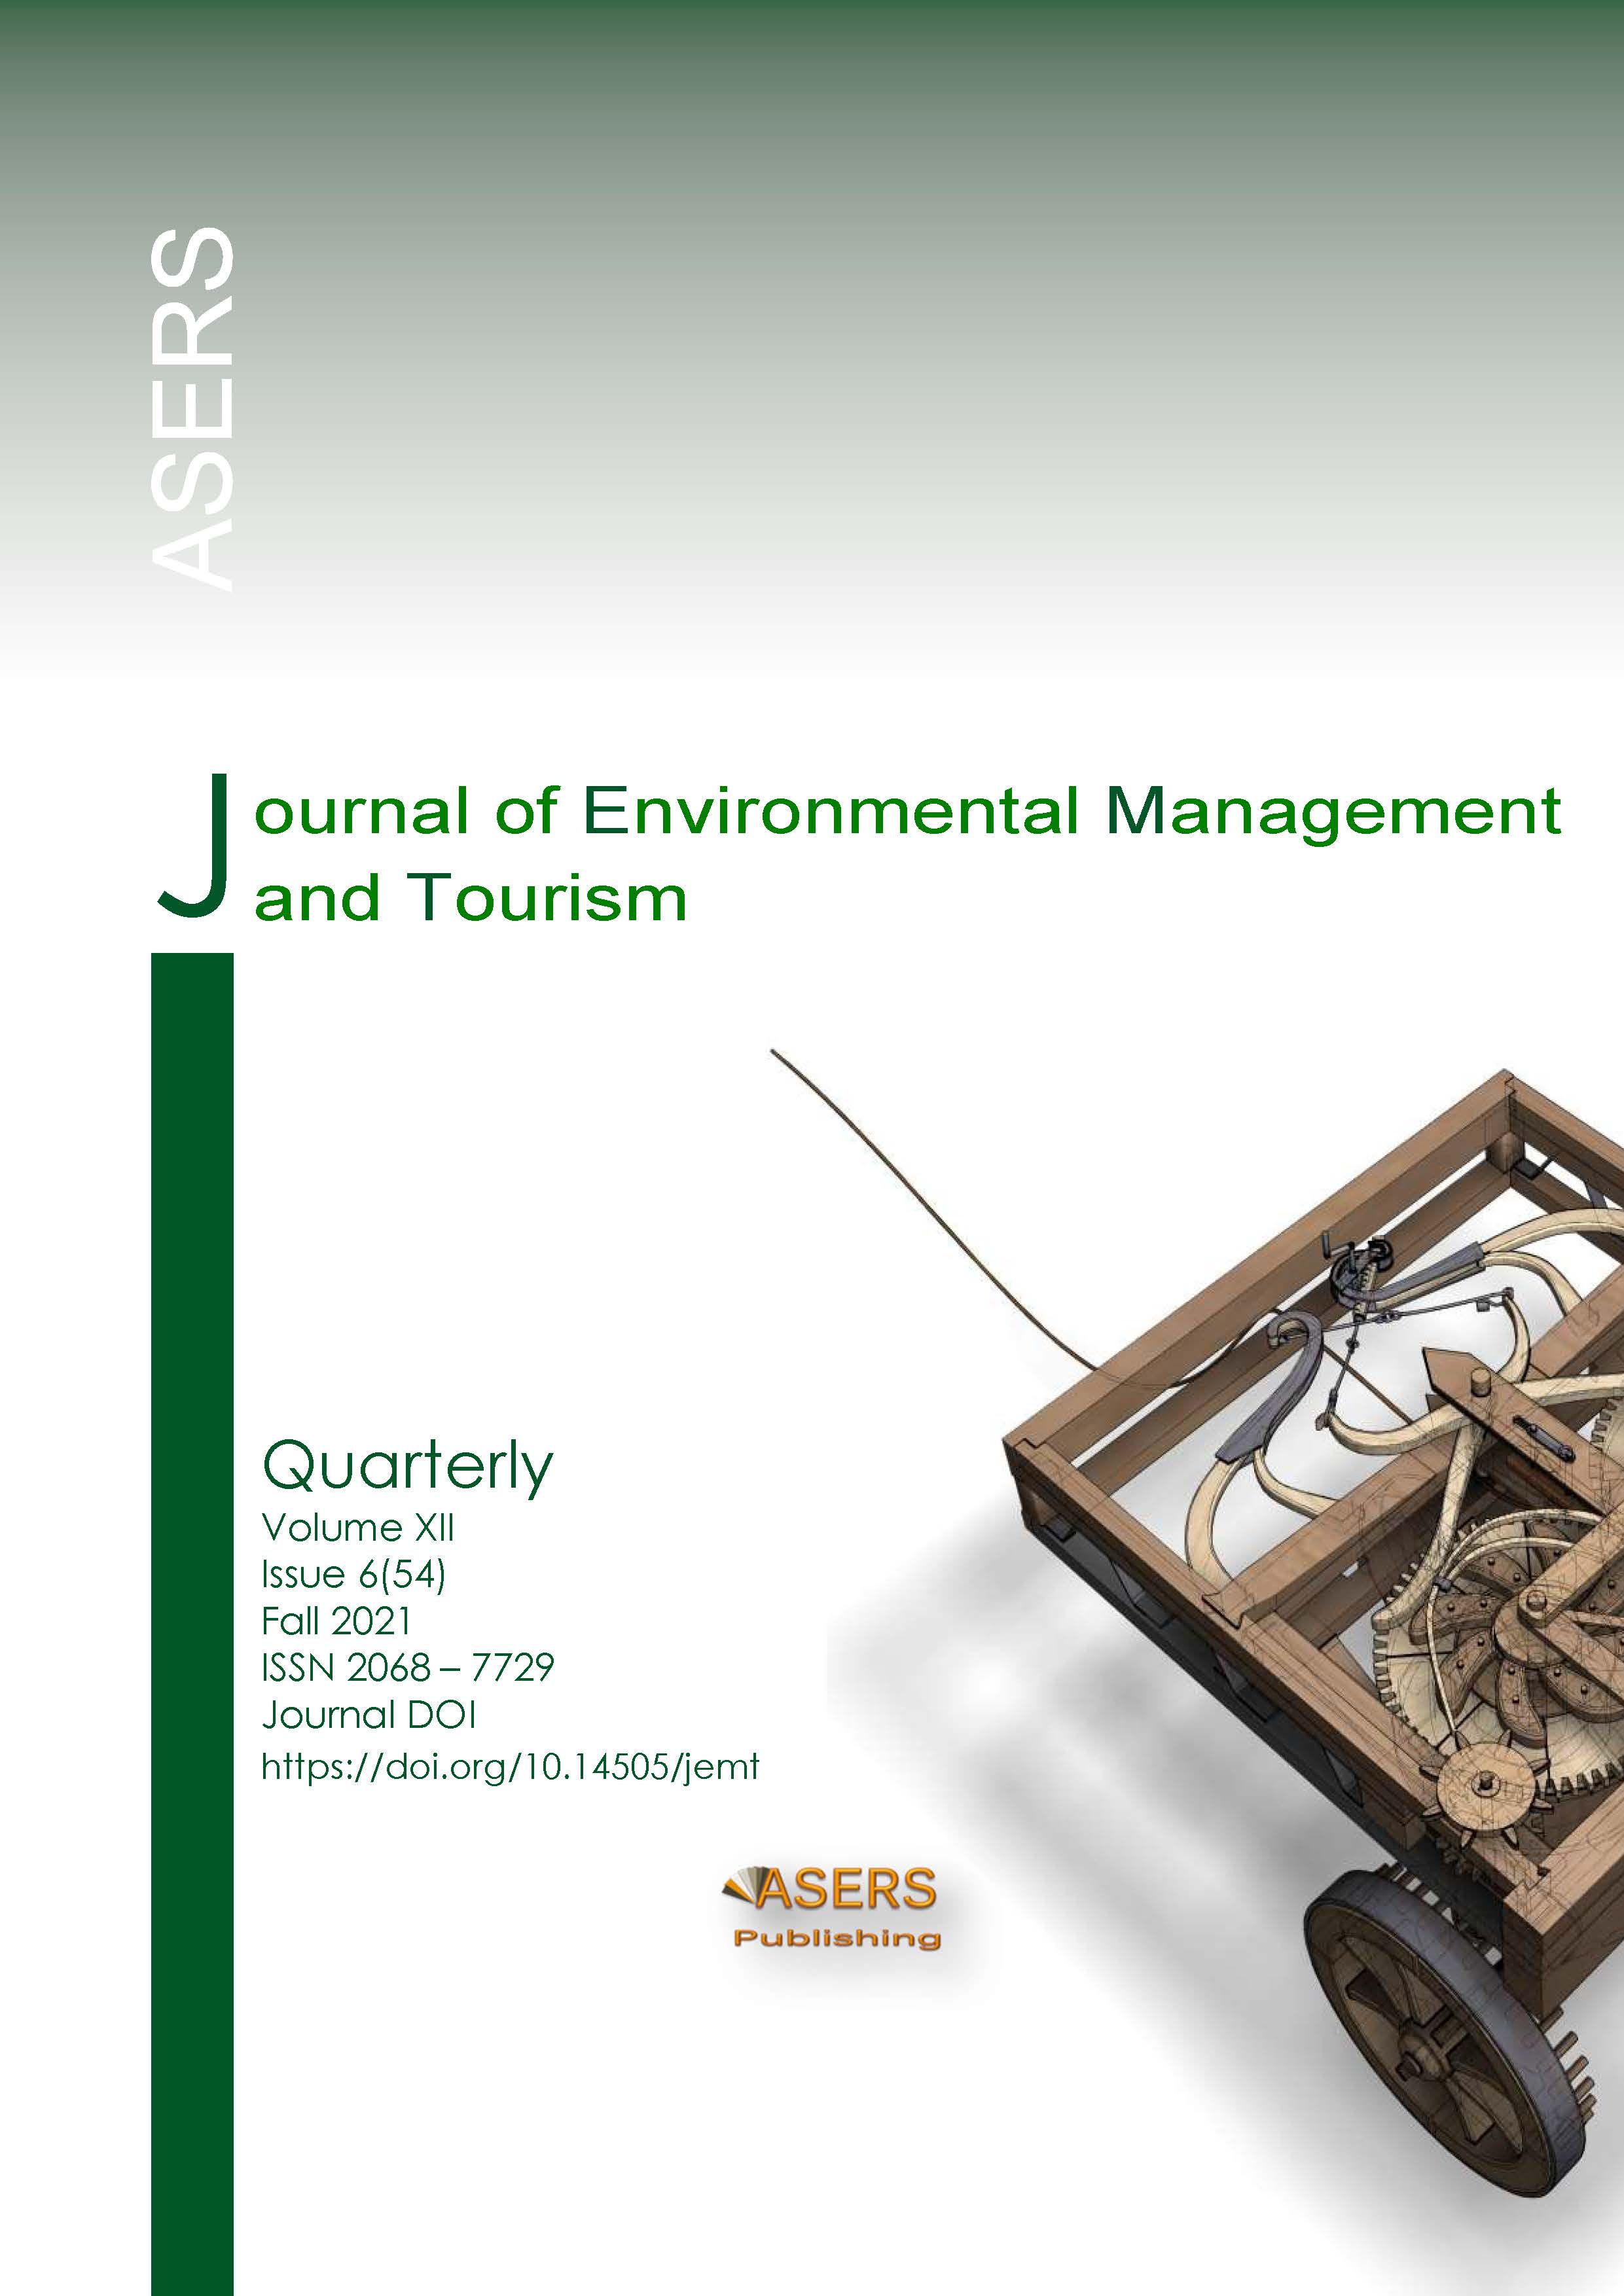 Mathematical Modeling of Tourism Development. An Application to Albanian Tourism